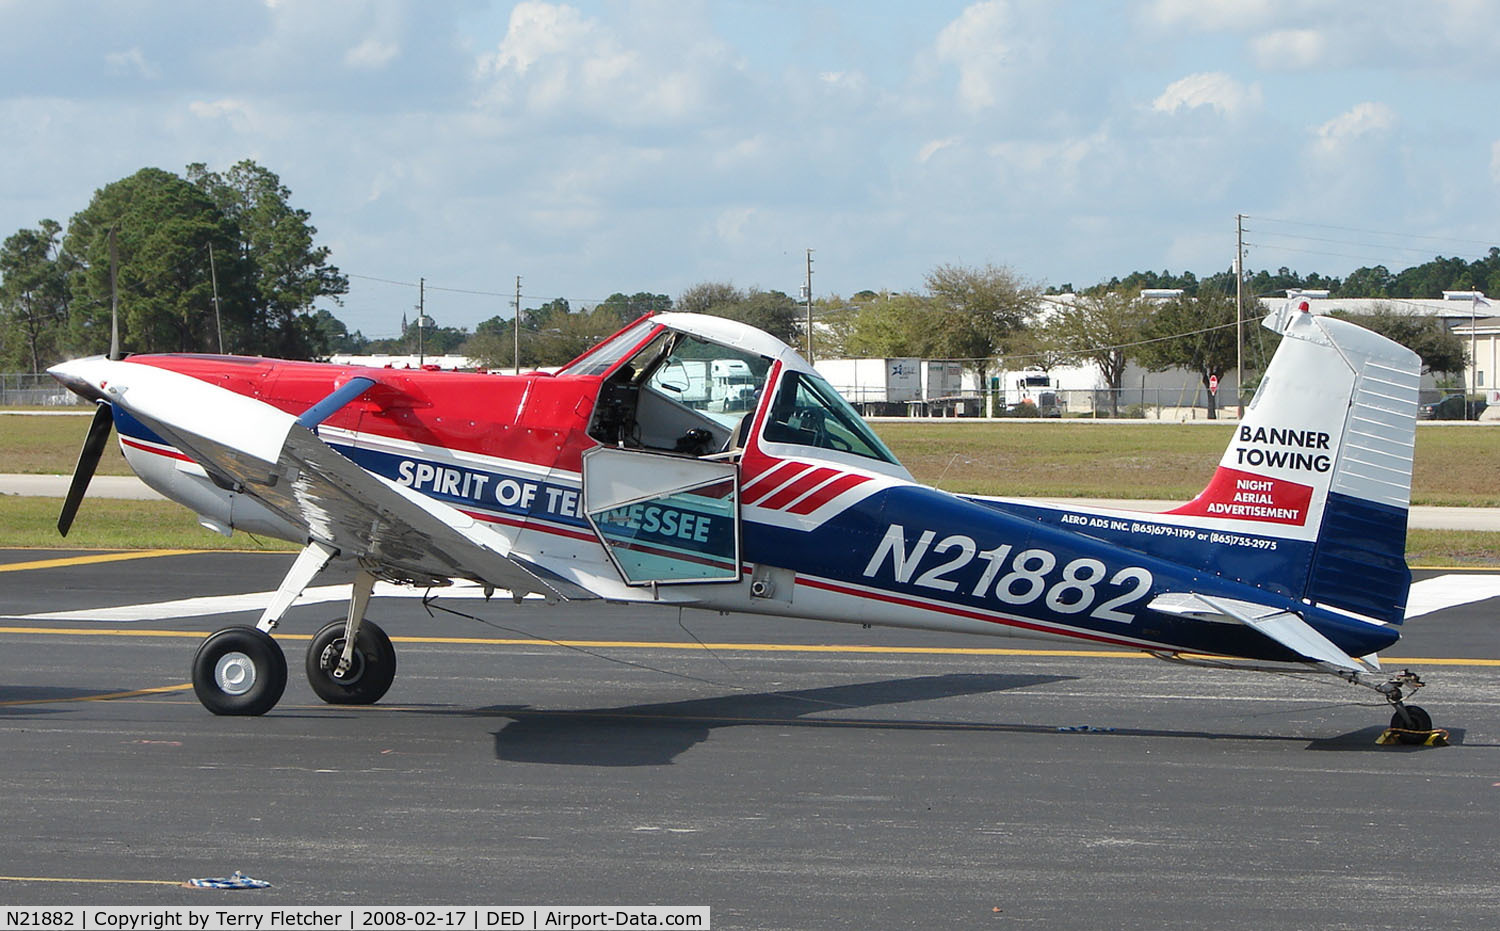 N21882, 1972 Cessna A188B C/N 18801097T, Pleased to photo this - a new type for me